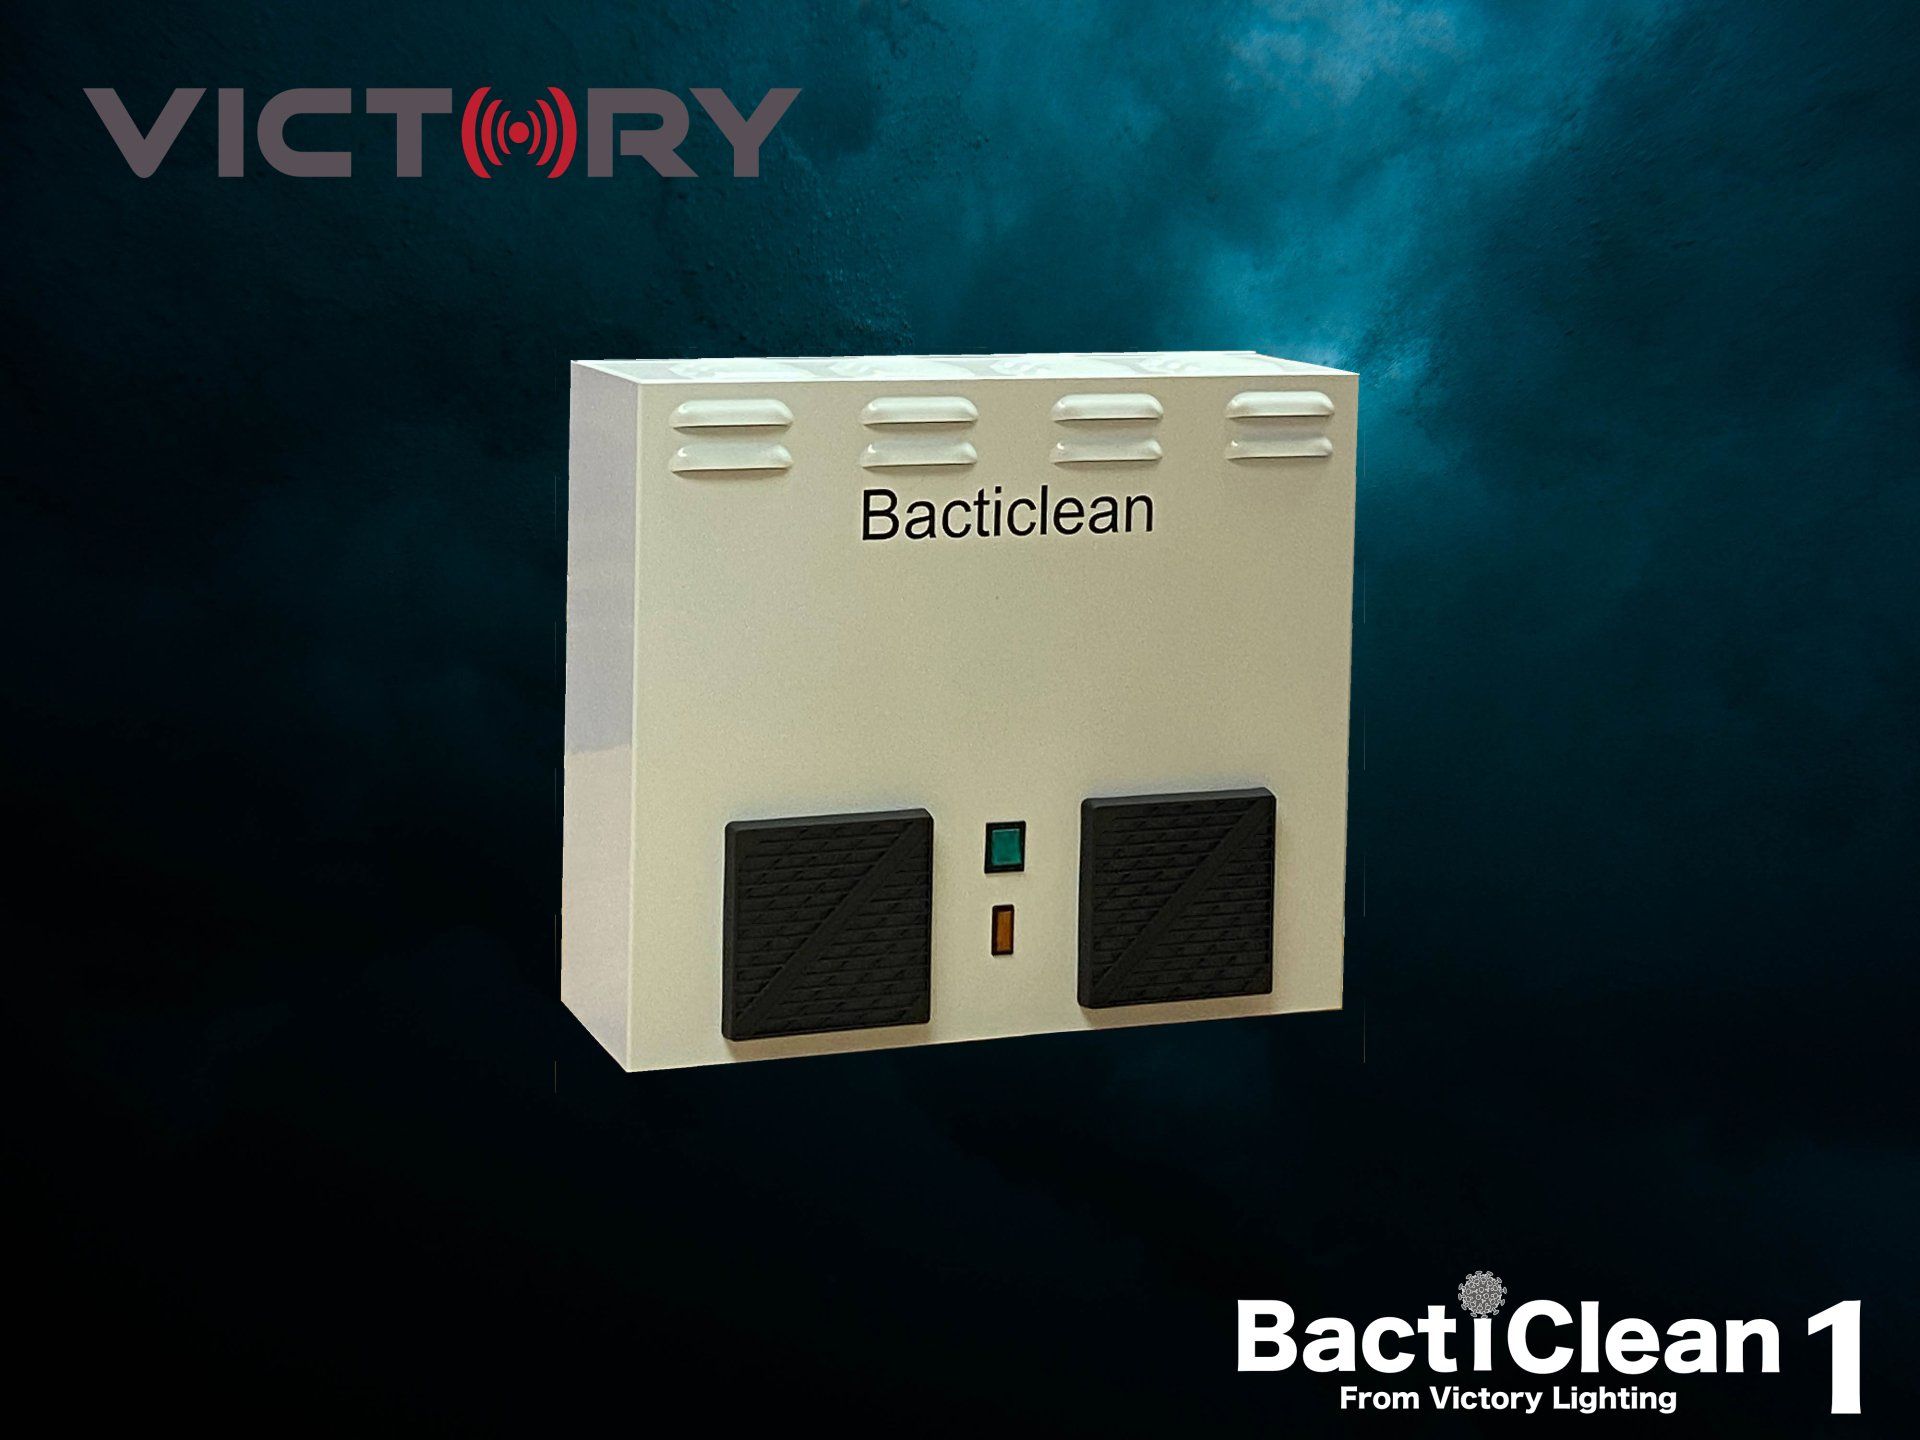 Bacticlean 1 UV Air Purifying System